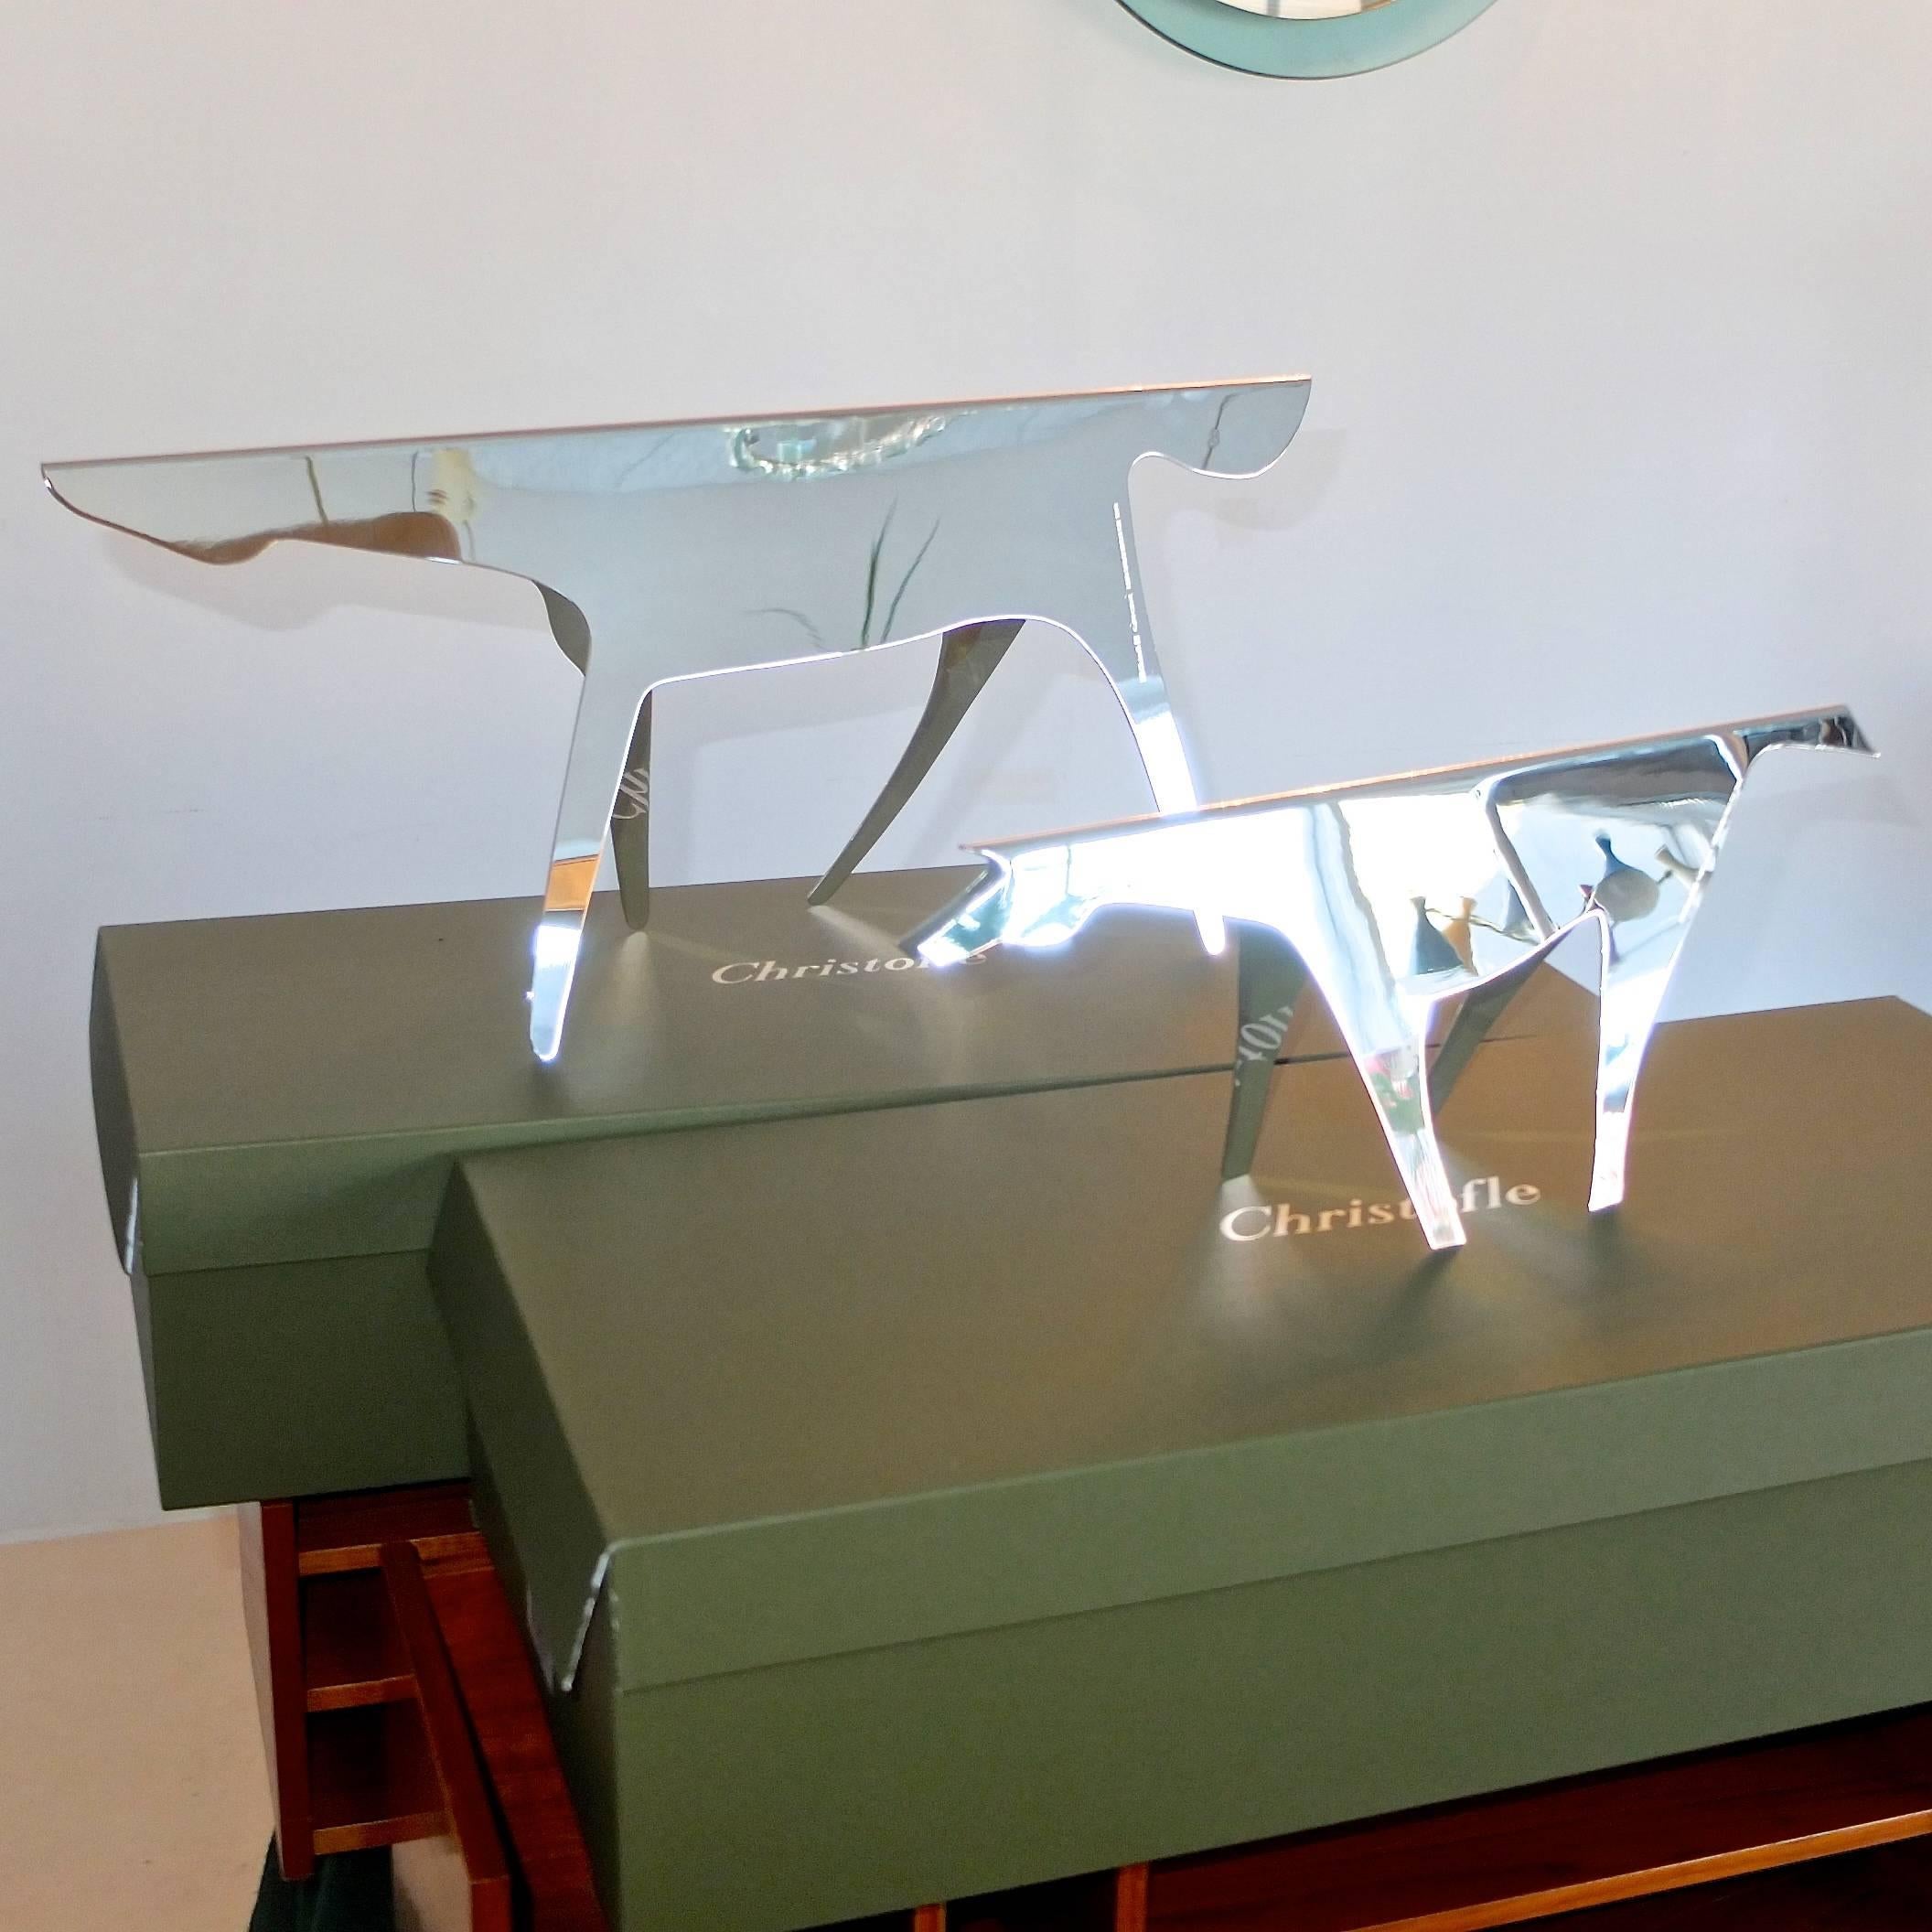 1978 Gio Ponti designed silver plated horse sculptures, titled 